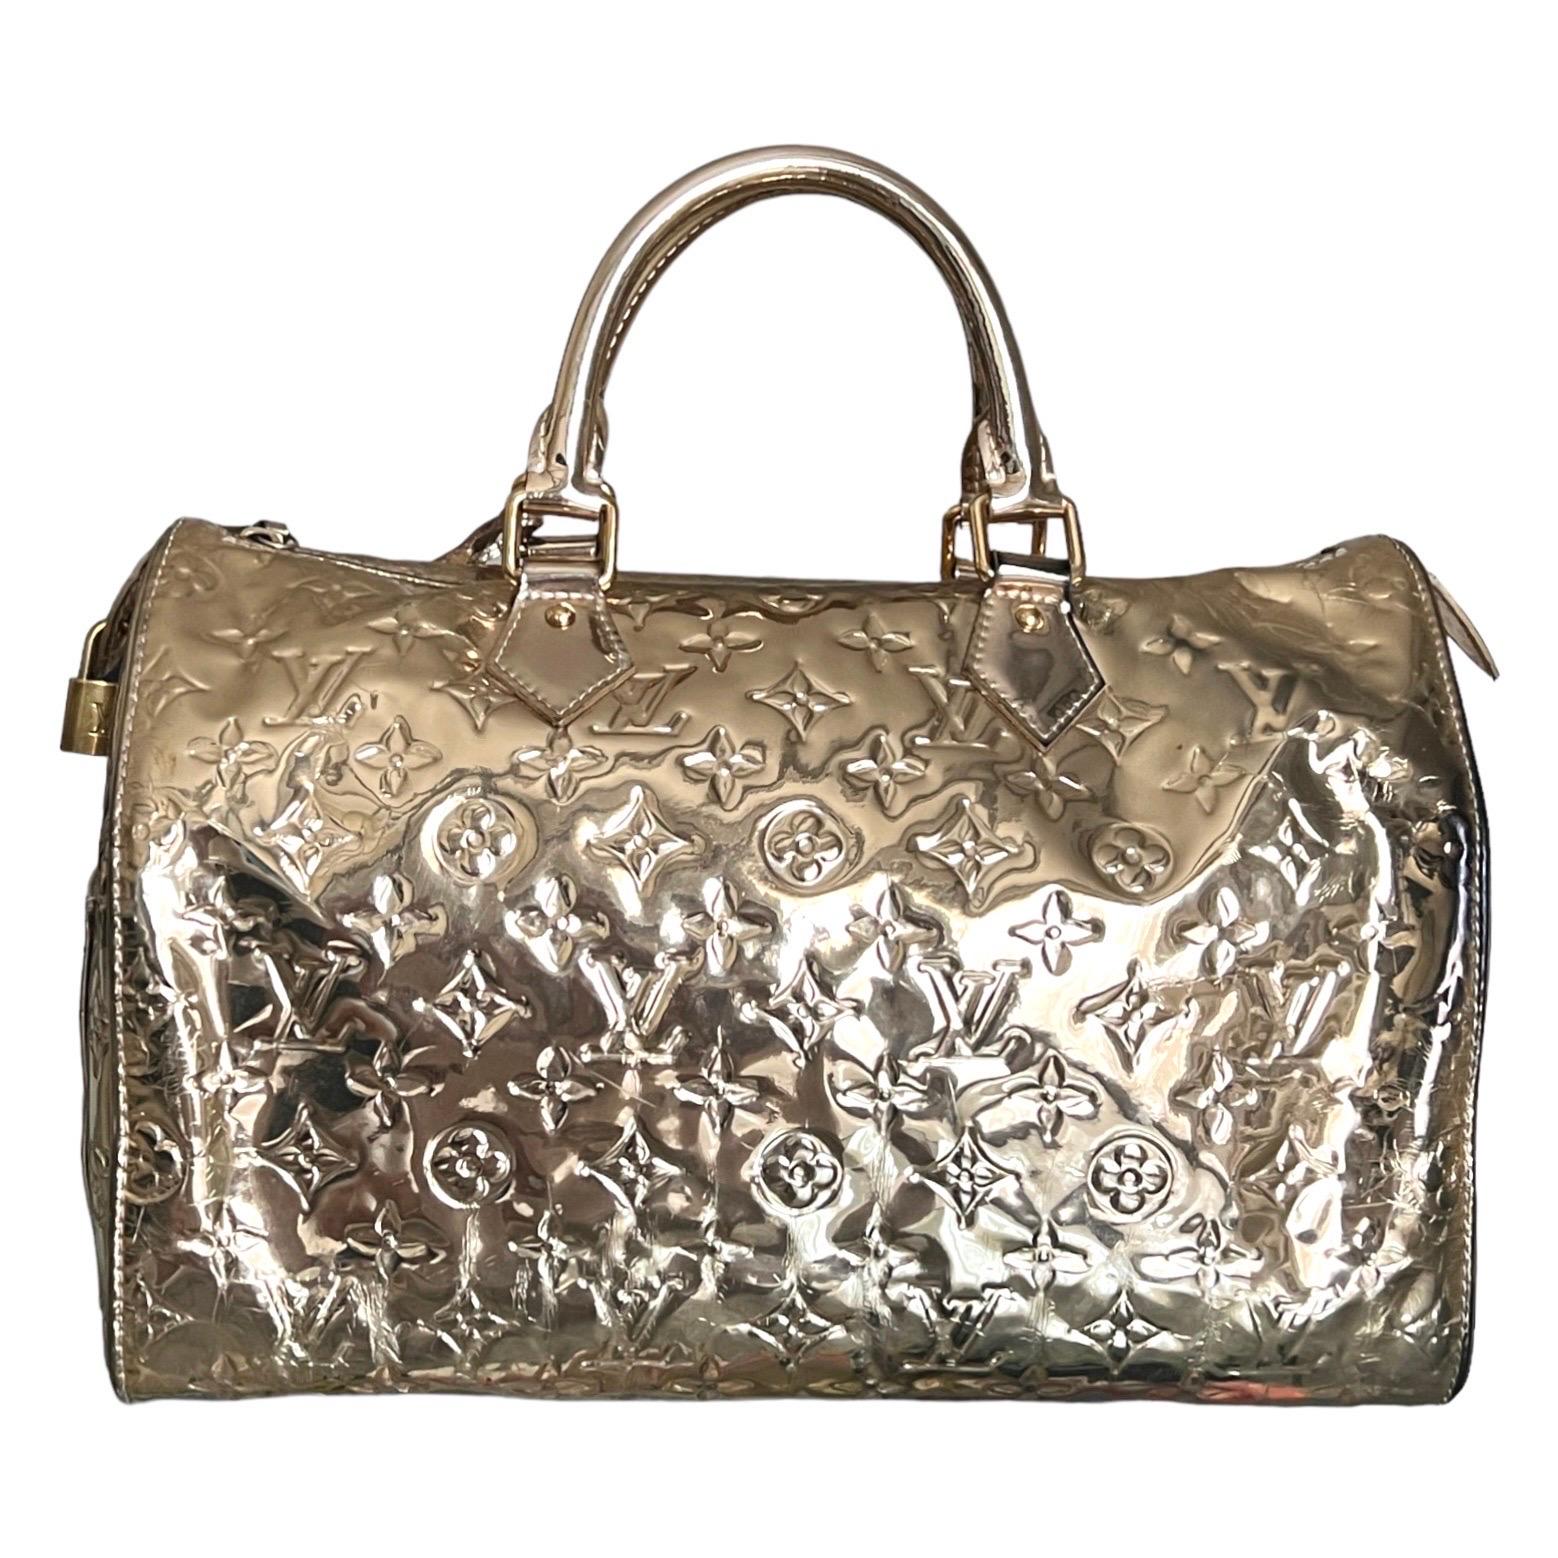 Limited Edition Louis Vuitton Monogram Miroir Monogram Speedy Bag
Designed by Marc Jacobs for Louis Vuitton's Fall 2006/2007 collection.
A true icon and sold out immediately in 2006.

A rare collector's piece and already part of the collection of